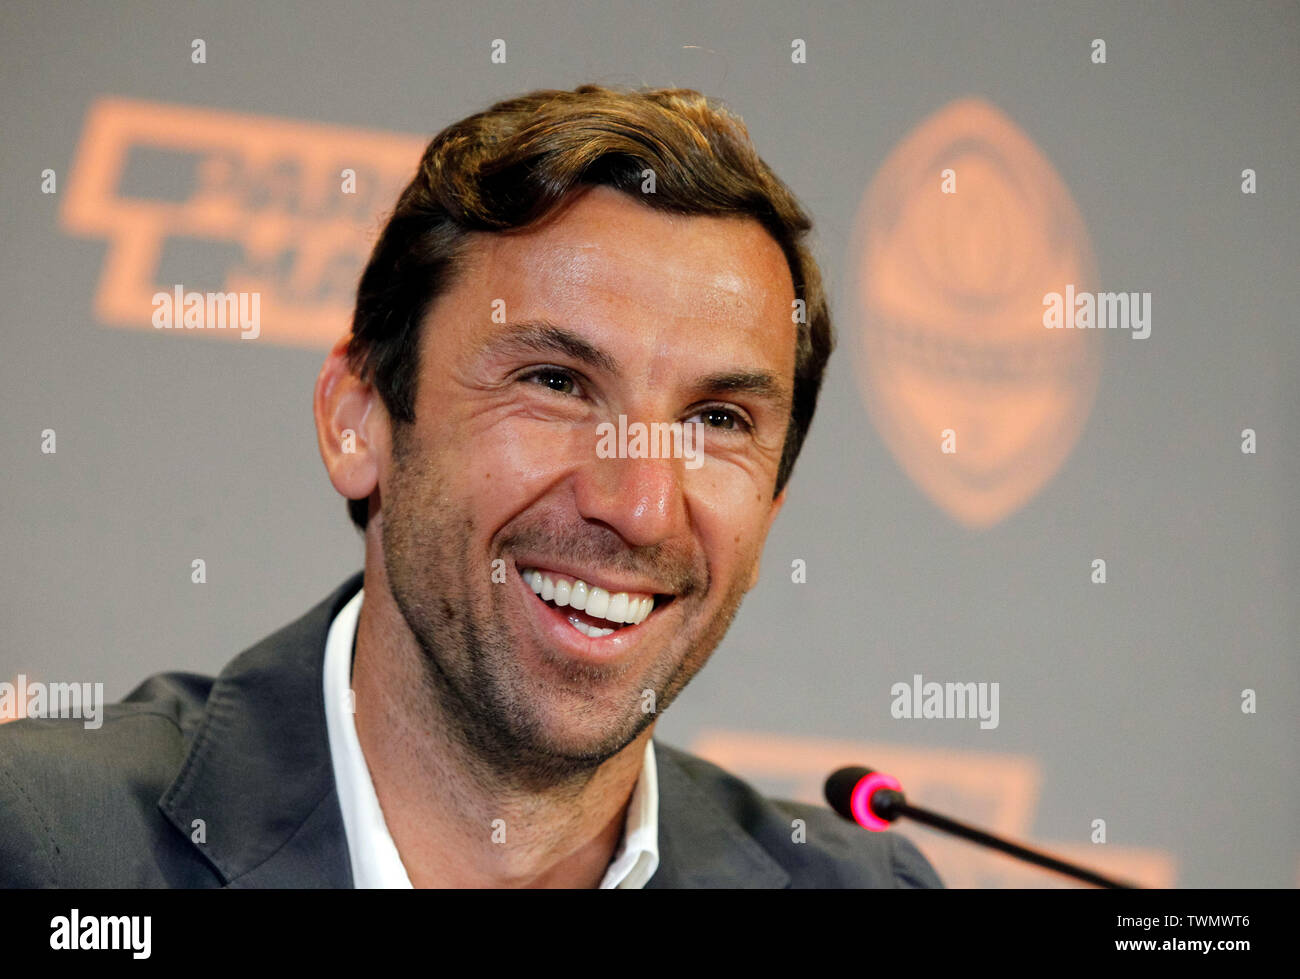 The former captain of Shakhtar Donetsk and Croatia national team Darijo Srna speaks during his first press conference as an assistant manager for Shakhtar Donetsk FC in Kiev. Stock Photo